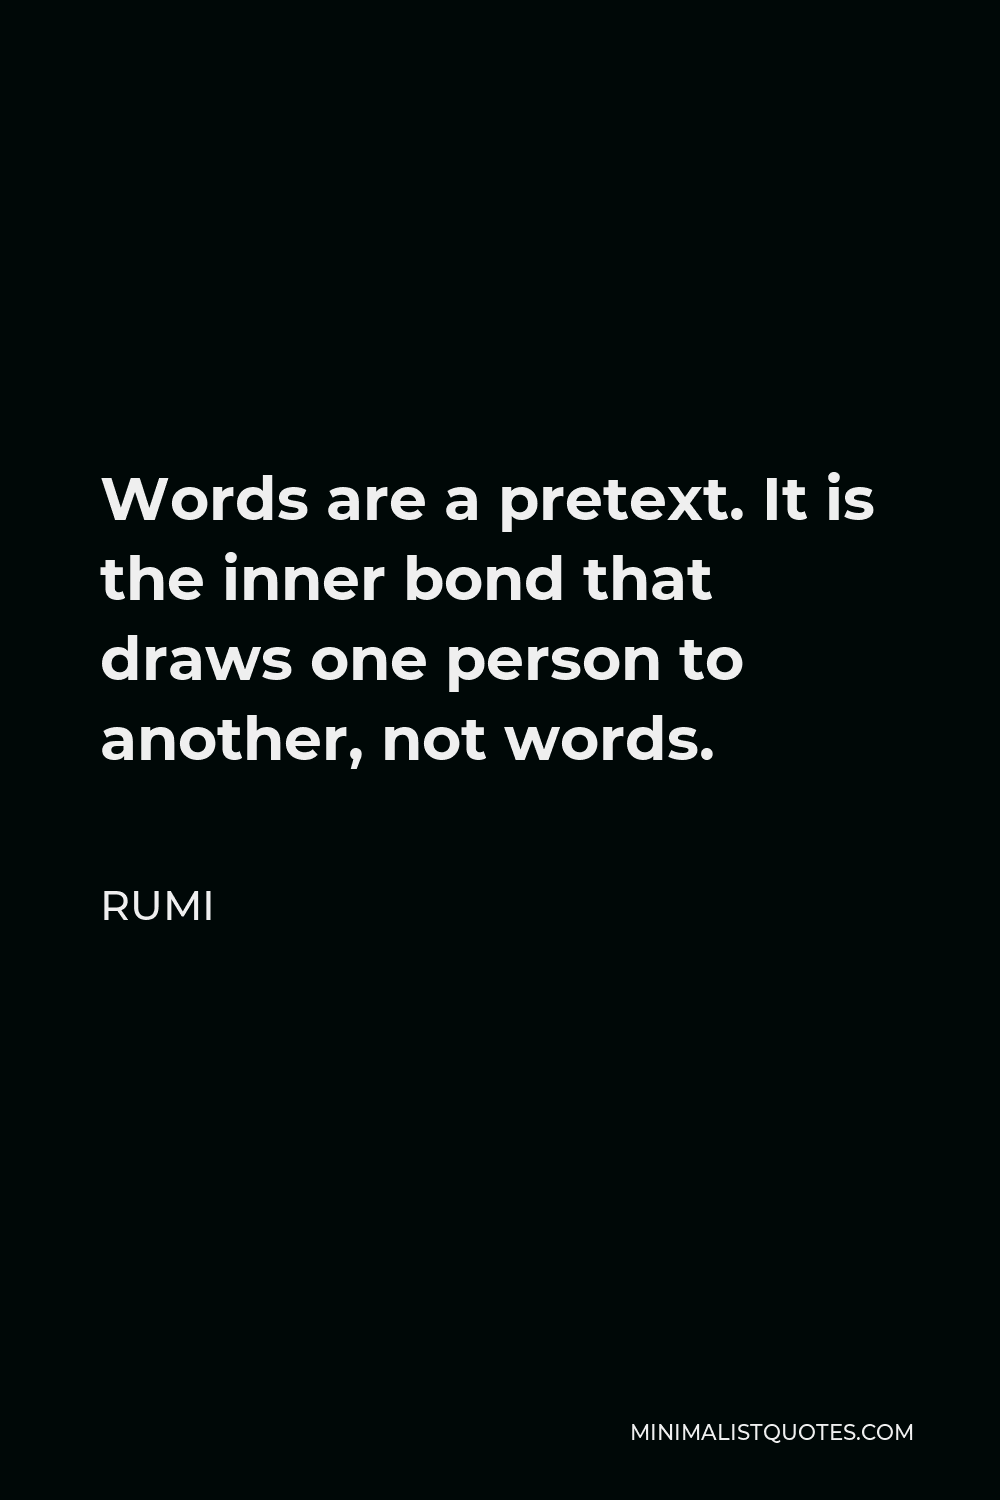 Rumi Quote - Words are a pretext. It is the inner bond that draws one person to another, not words.